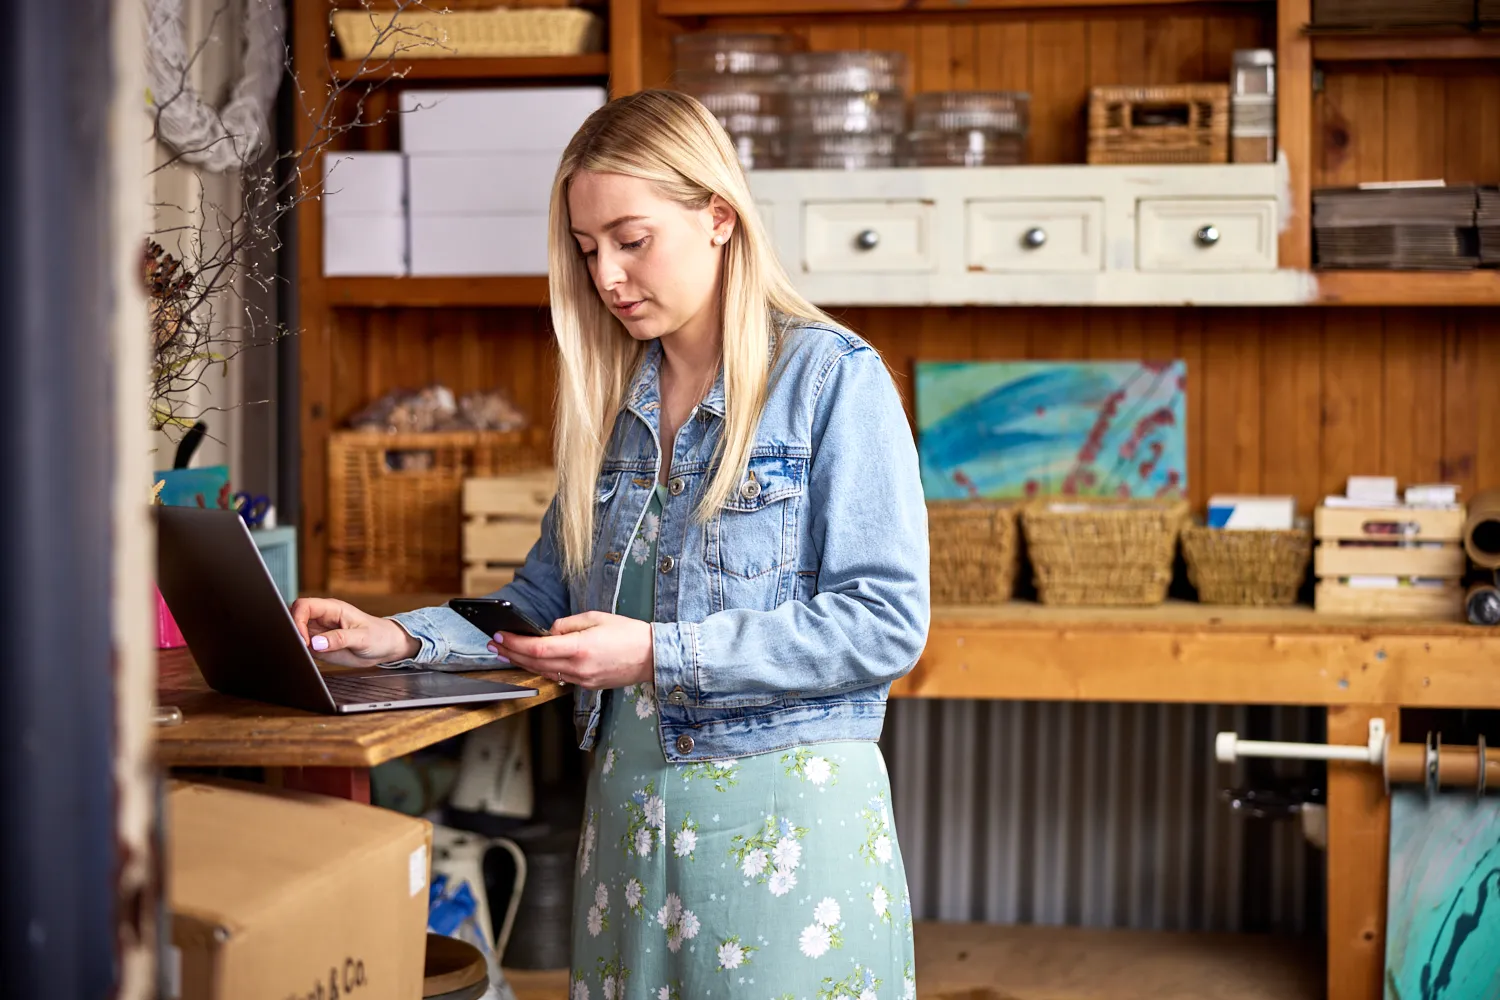 A person looking at a mobile phone, standing at a laptop in a shed surrounded by florist supplies